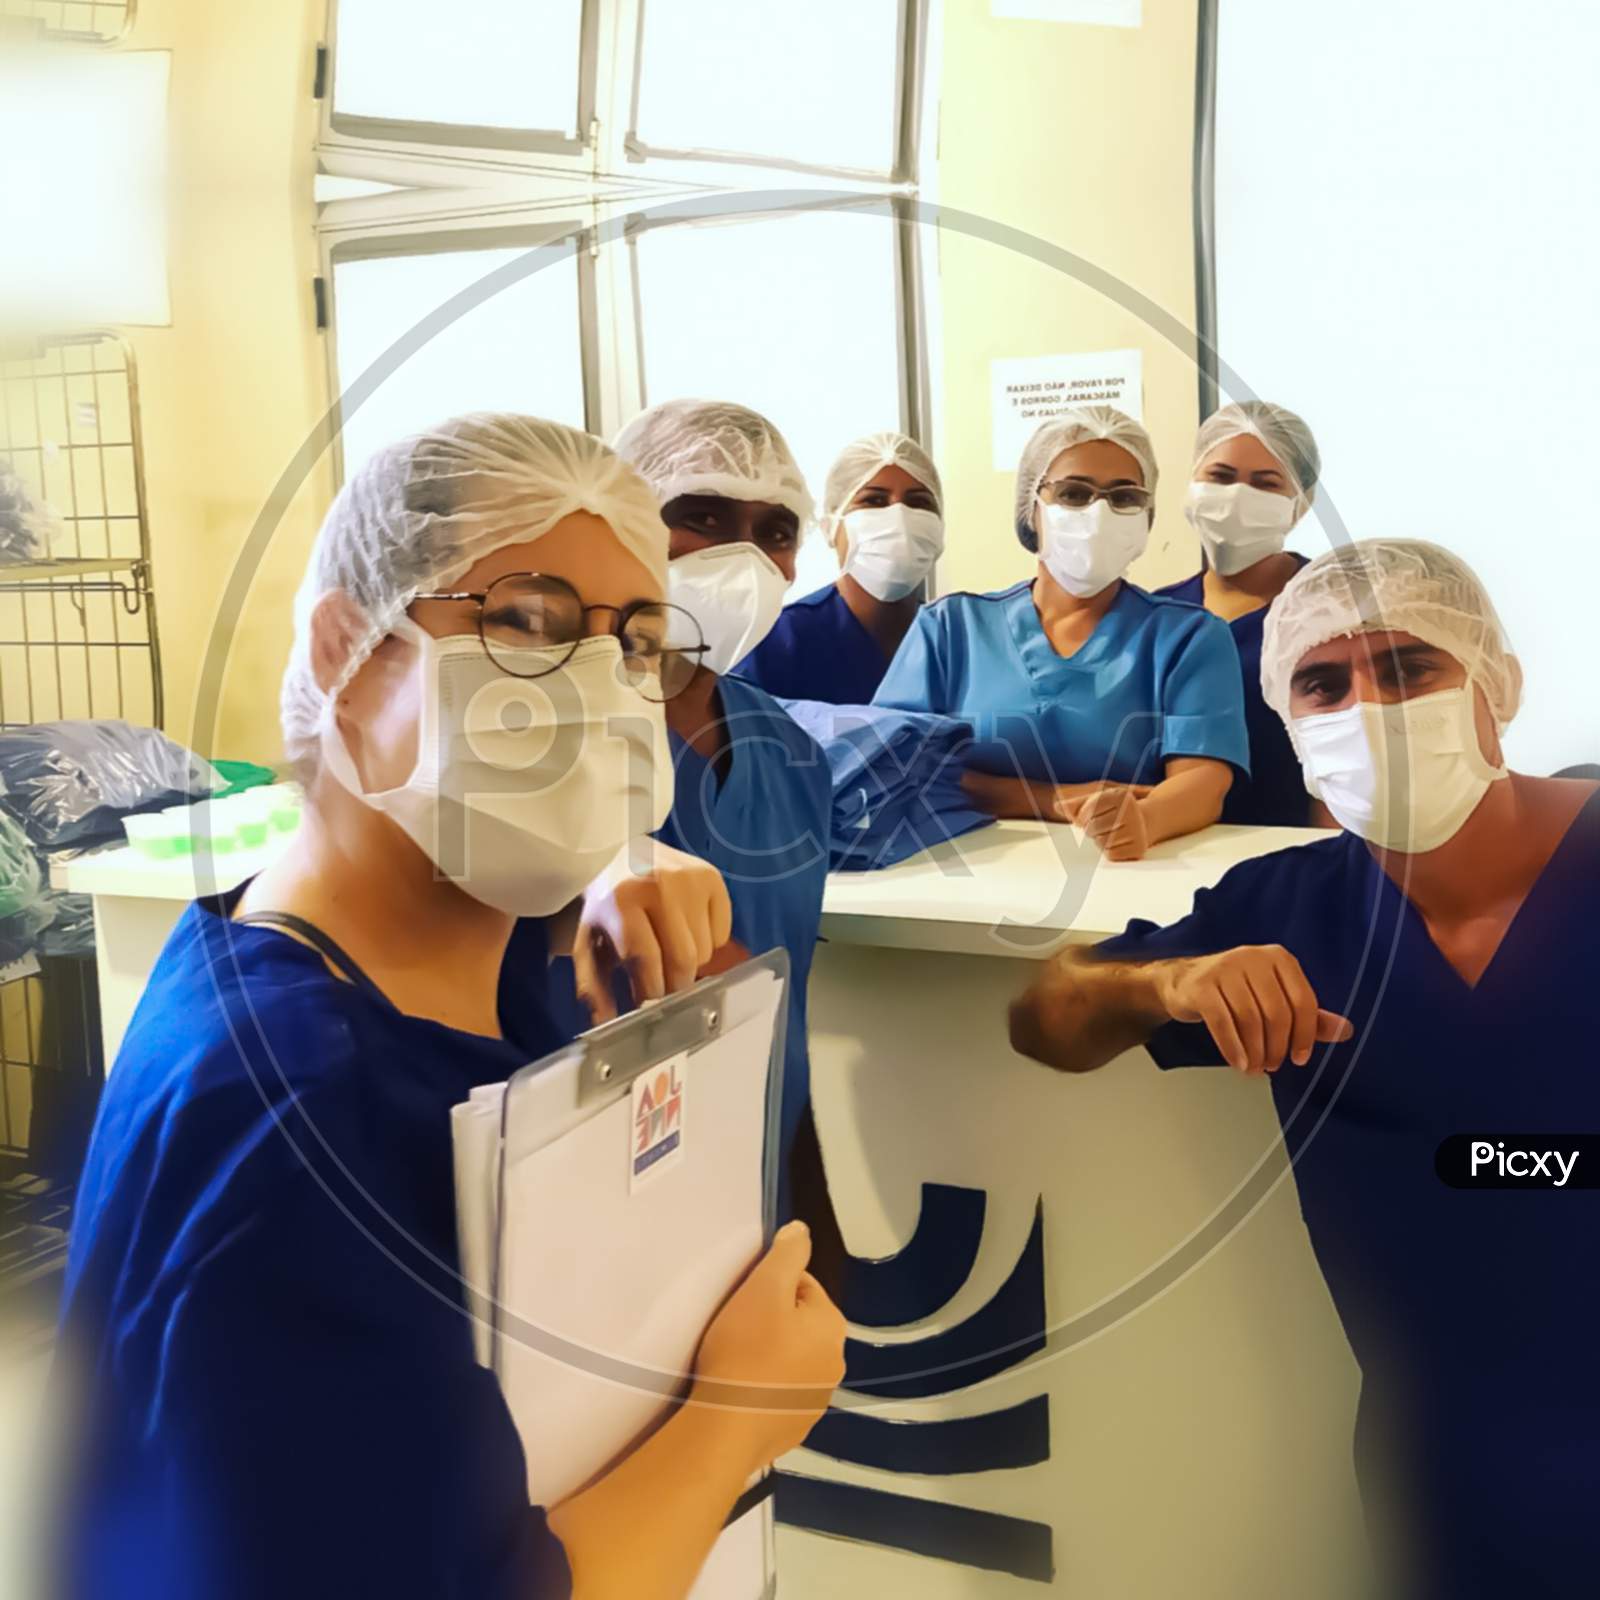 Doctors And Nurses In Covid 19 Hospital Have Shallow Depth Of Field Selective Focus Blur And Wonderland Background In Covid Hospital Wearing Mask Protective Kit Ppe Kit To Protect From Corona Virus.